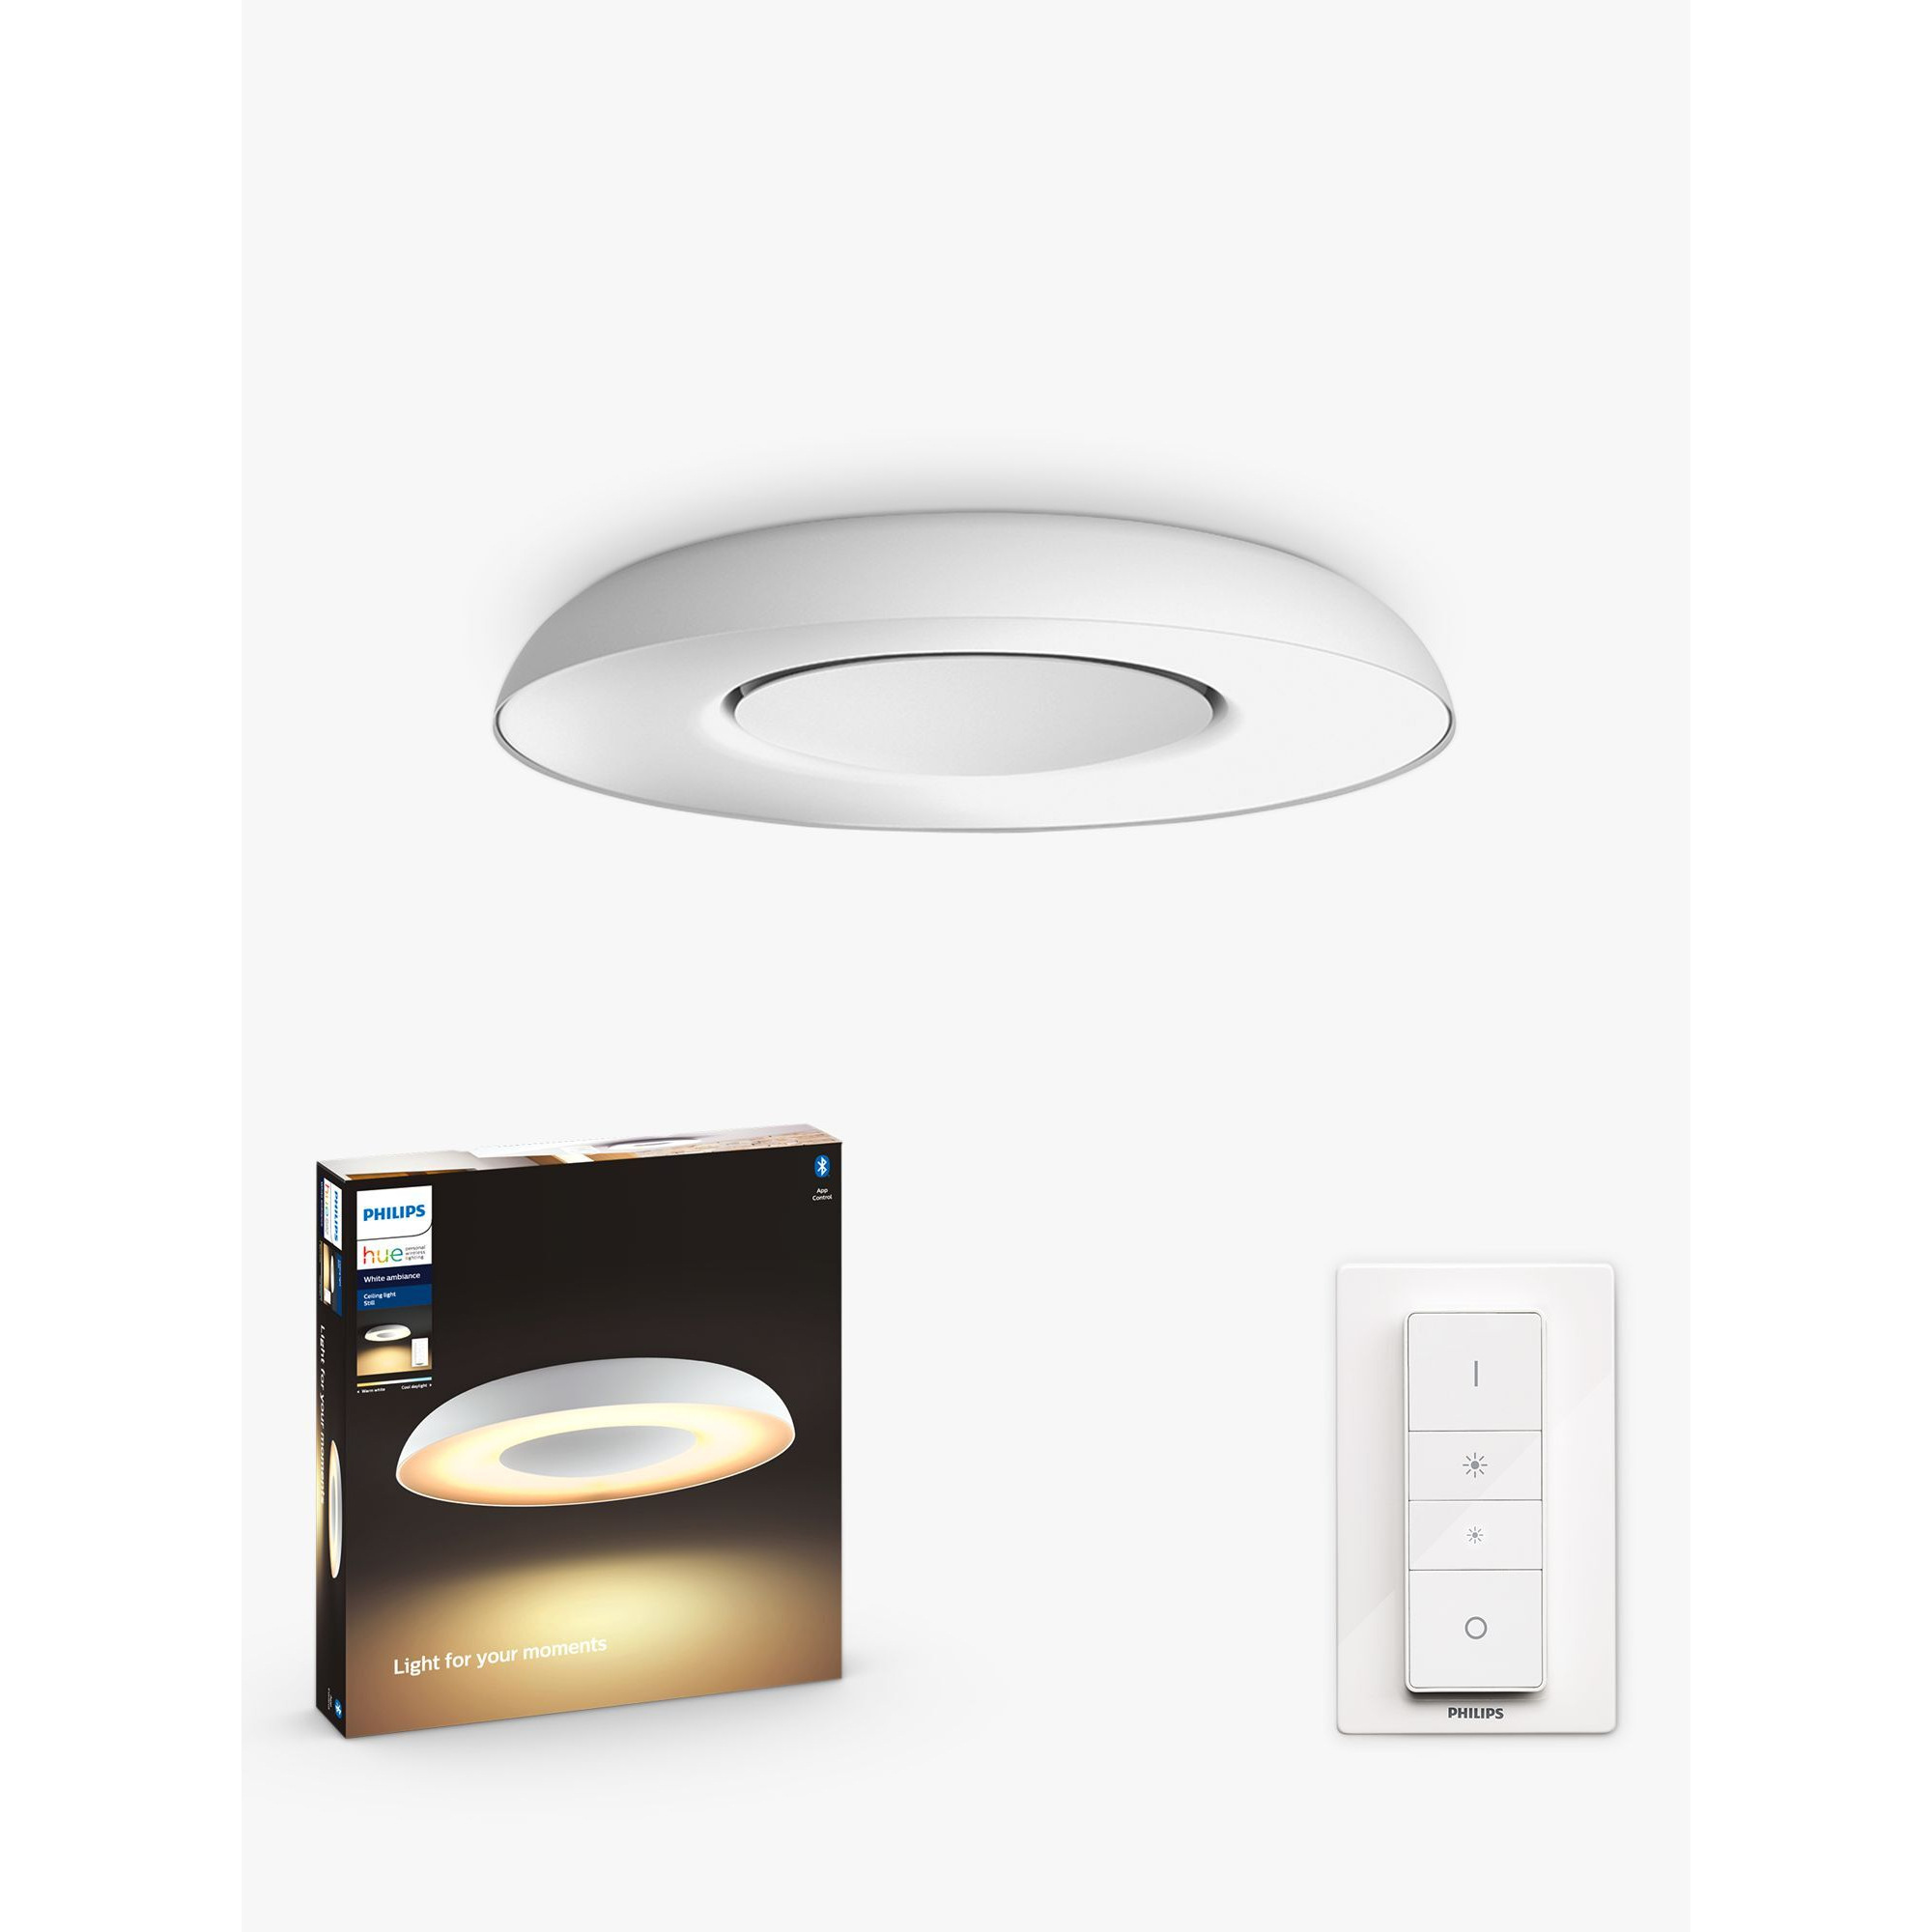 Philips Hue White Ambiance Still LED Smart Semi Flush Ceiling Light with Bluetooth and Dimmer Switch - image 1